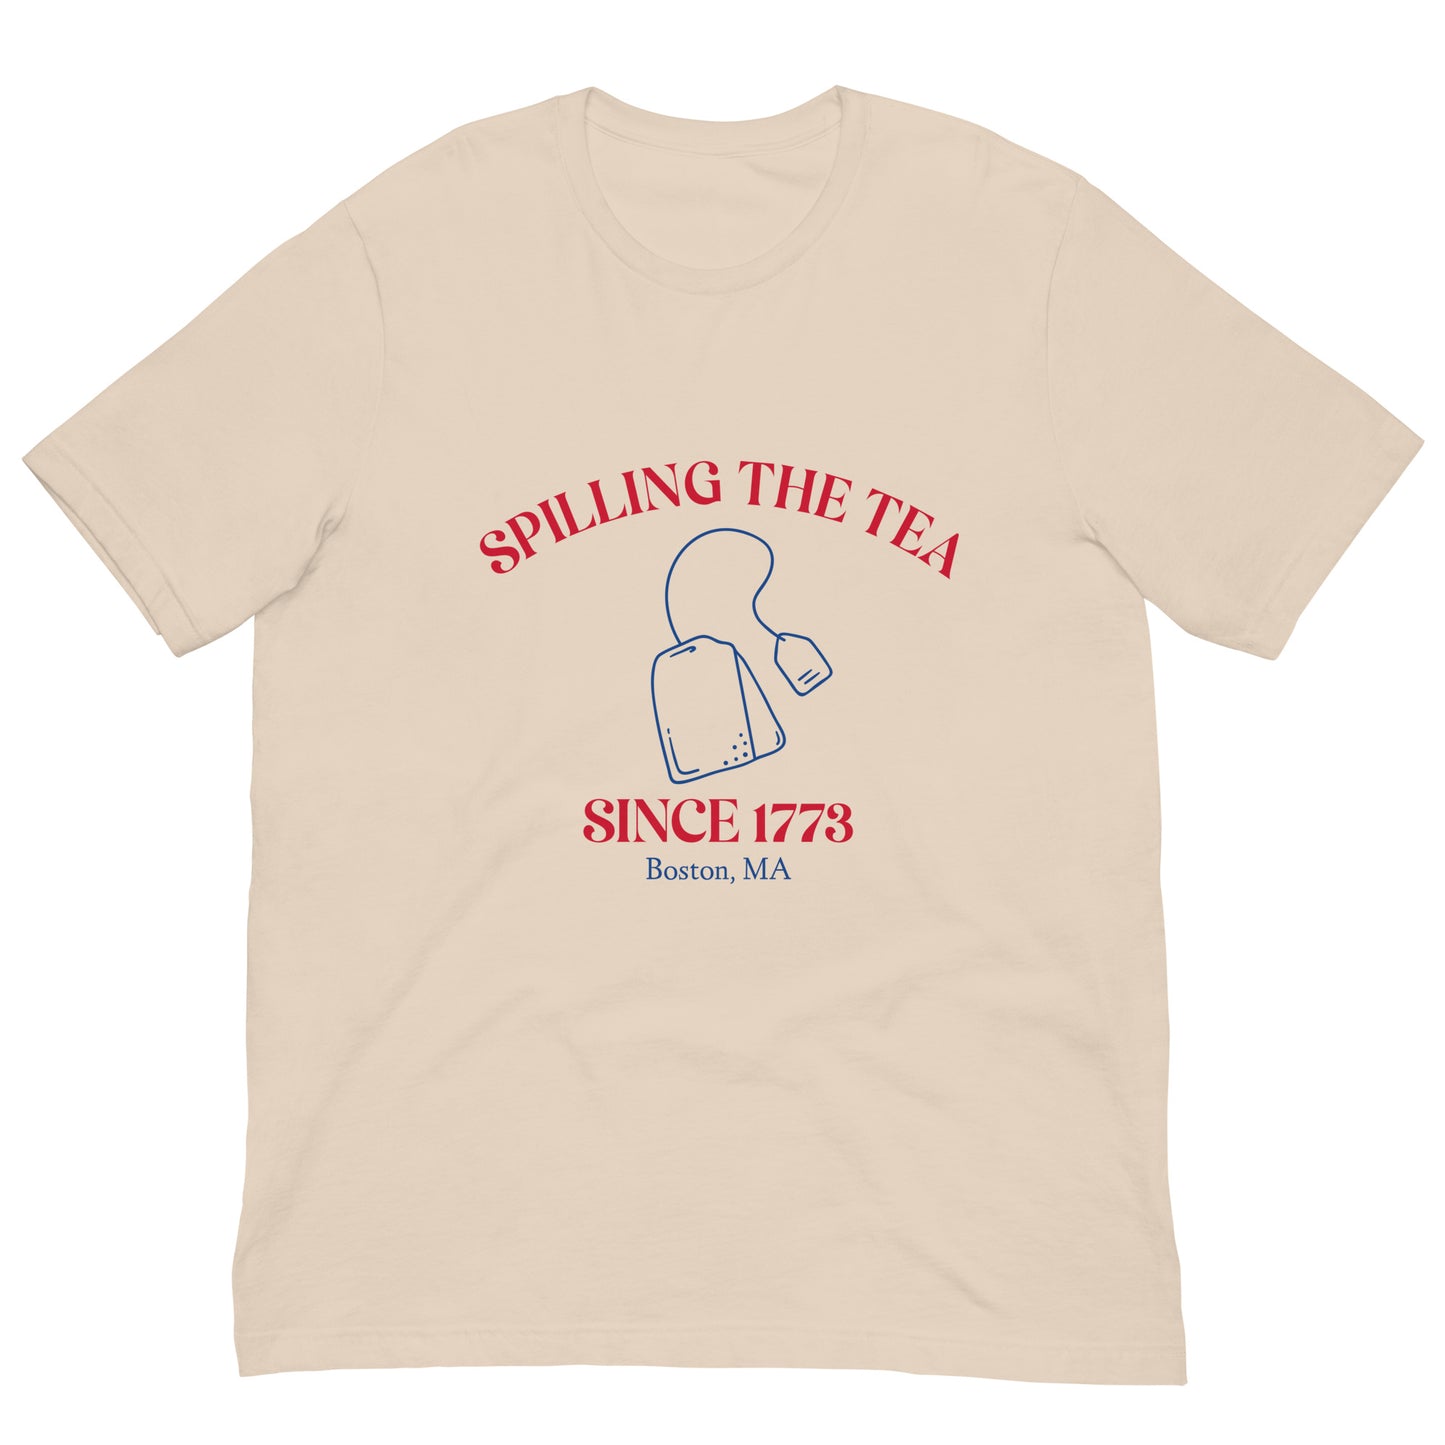 tan  tshirt that say "spilling the tea since 1773" in red lettering and "Boston MA" in blue lettering with tea bag graphic in middle